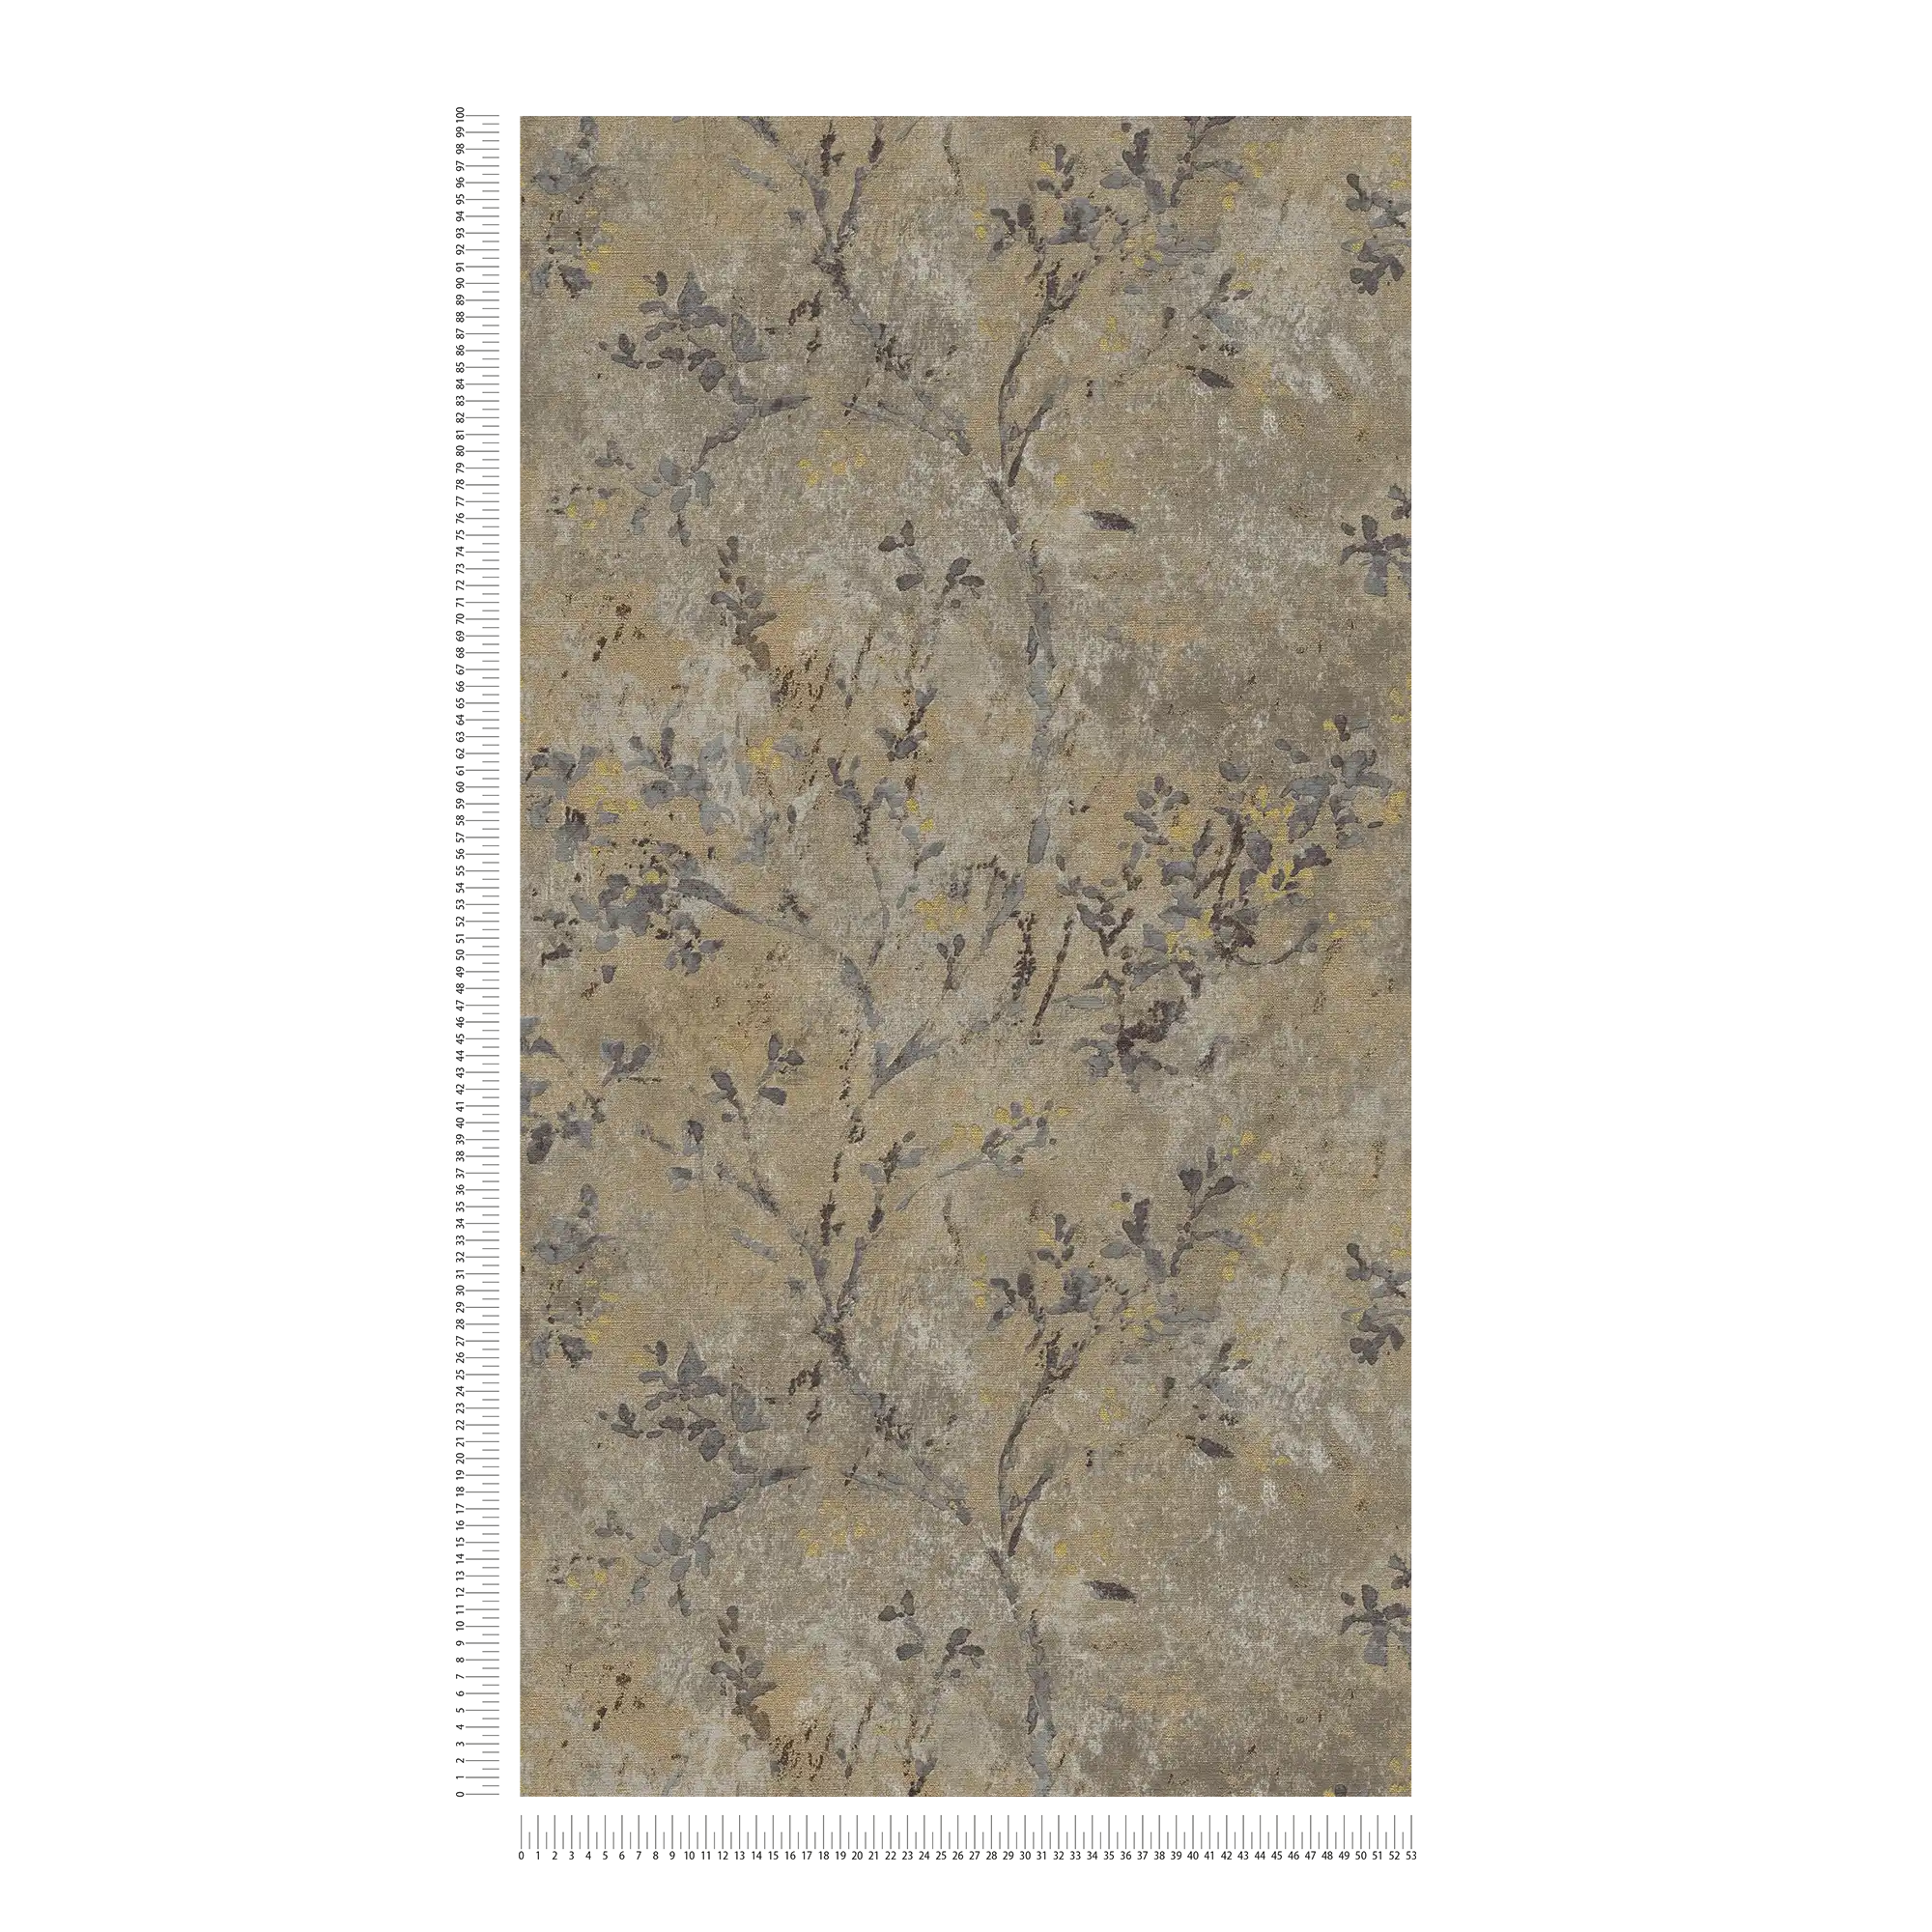             Non-woven wallpaper with floral pattern in watercolour look - brown, grey, gold
        